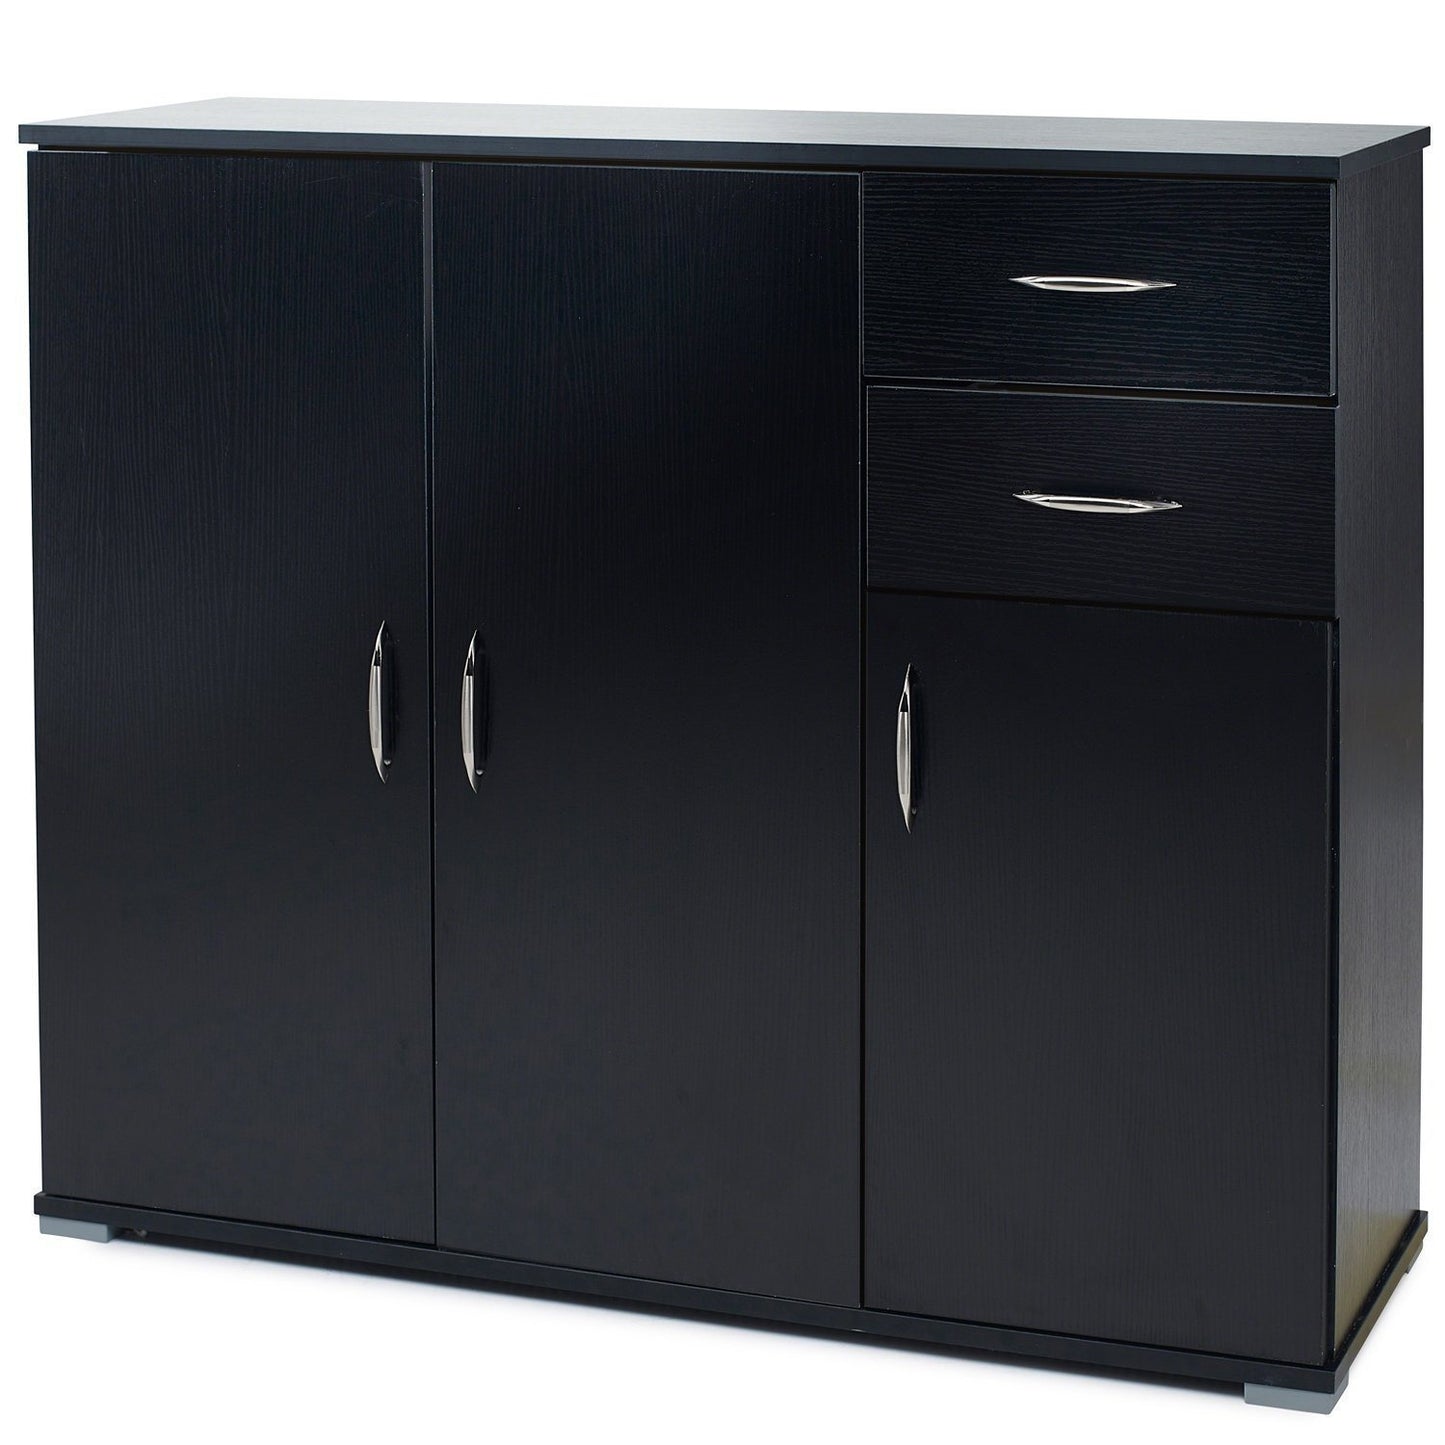 Home Office Cupboard Cabinet in Black - Laura James